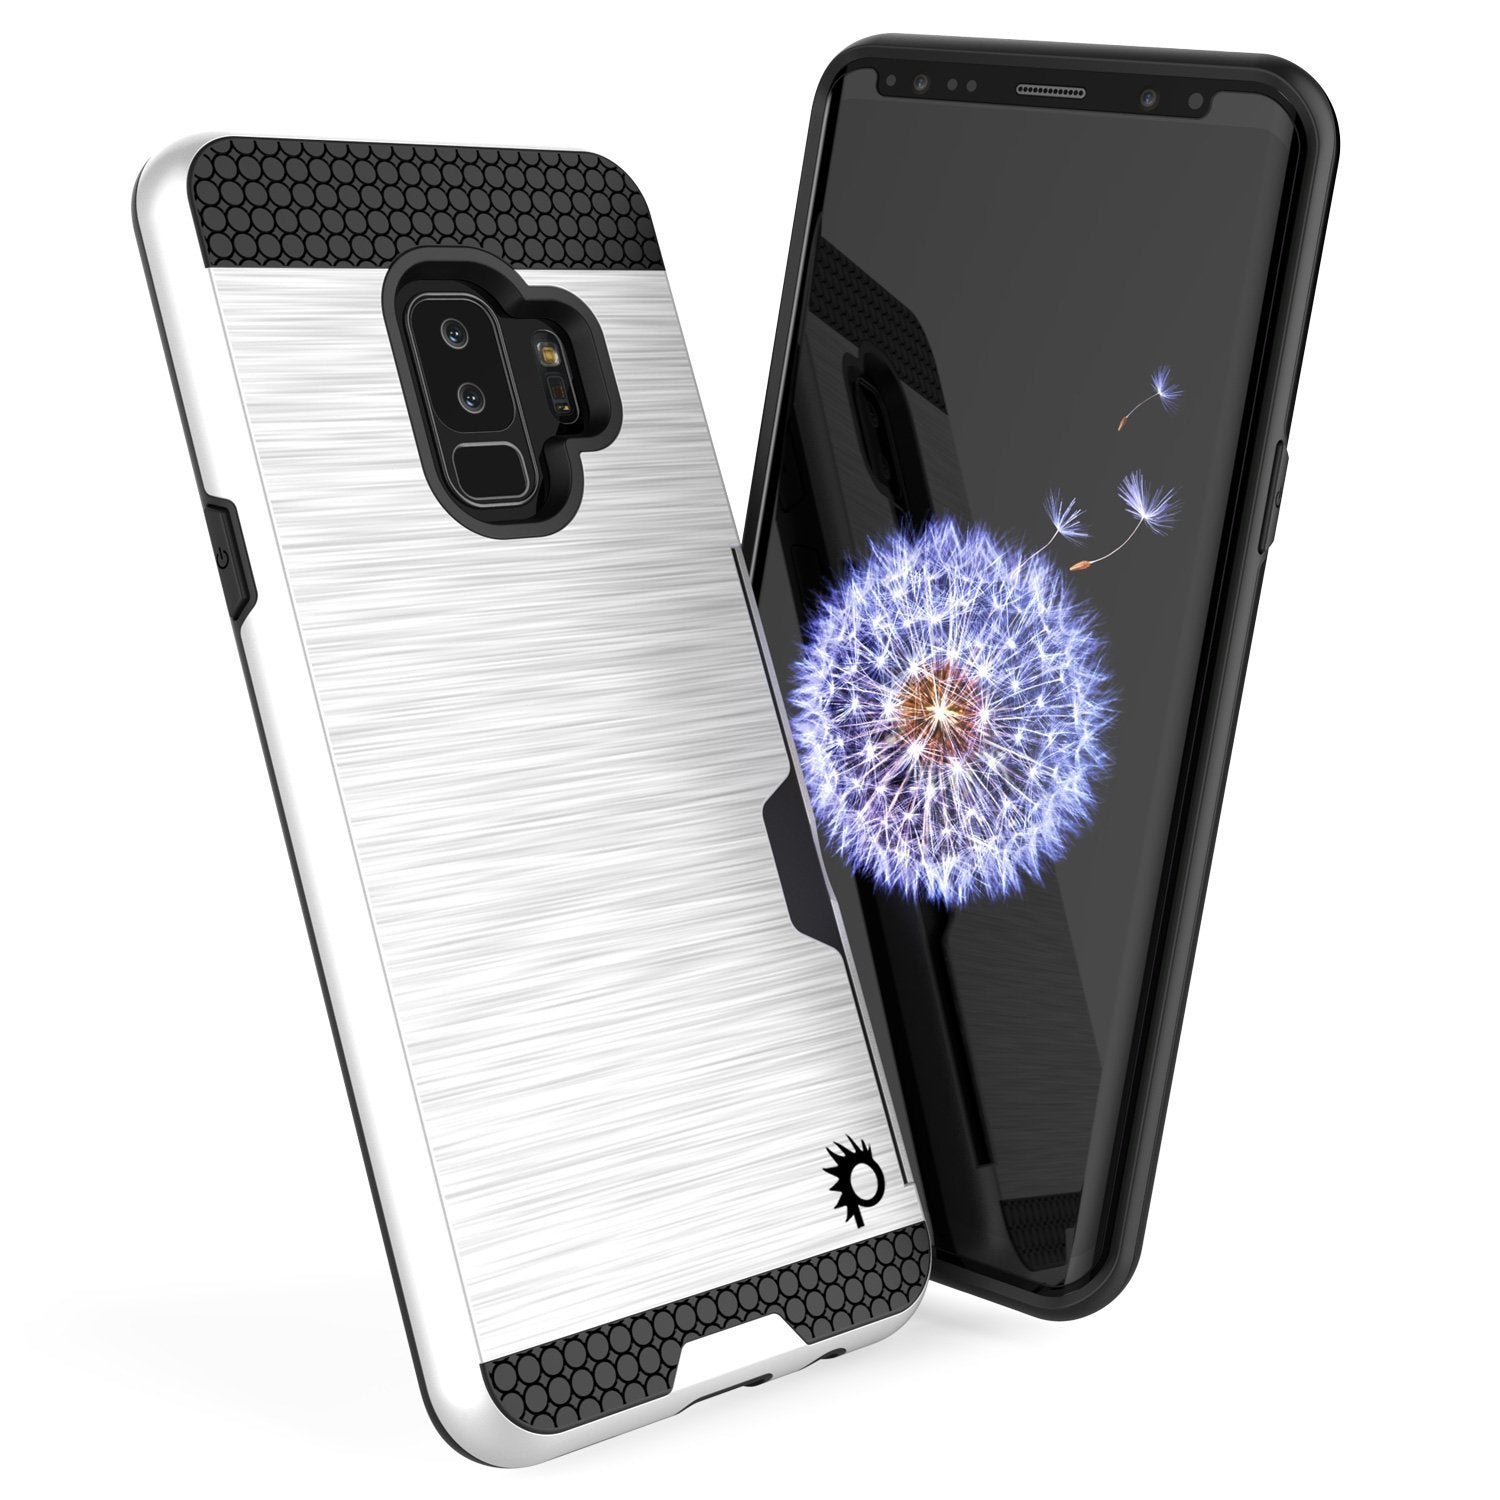 Galaxy S9 Plus Case, PUNKcase [SLOT Series] [Slim Fit] Dual-Layer Armor Cover w/Integrated Anti-Shock System, Credit Card Slot & Screen Protector [White]